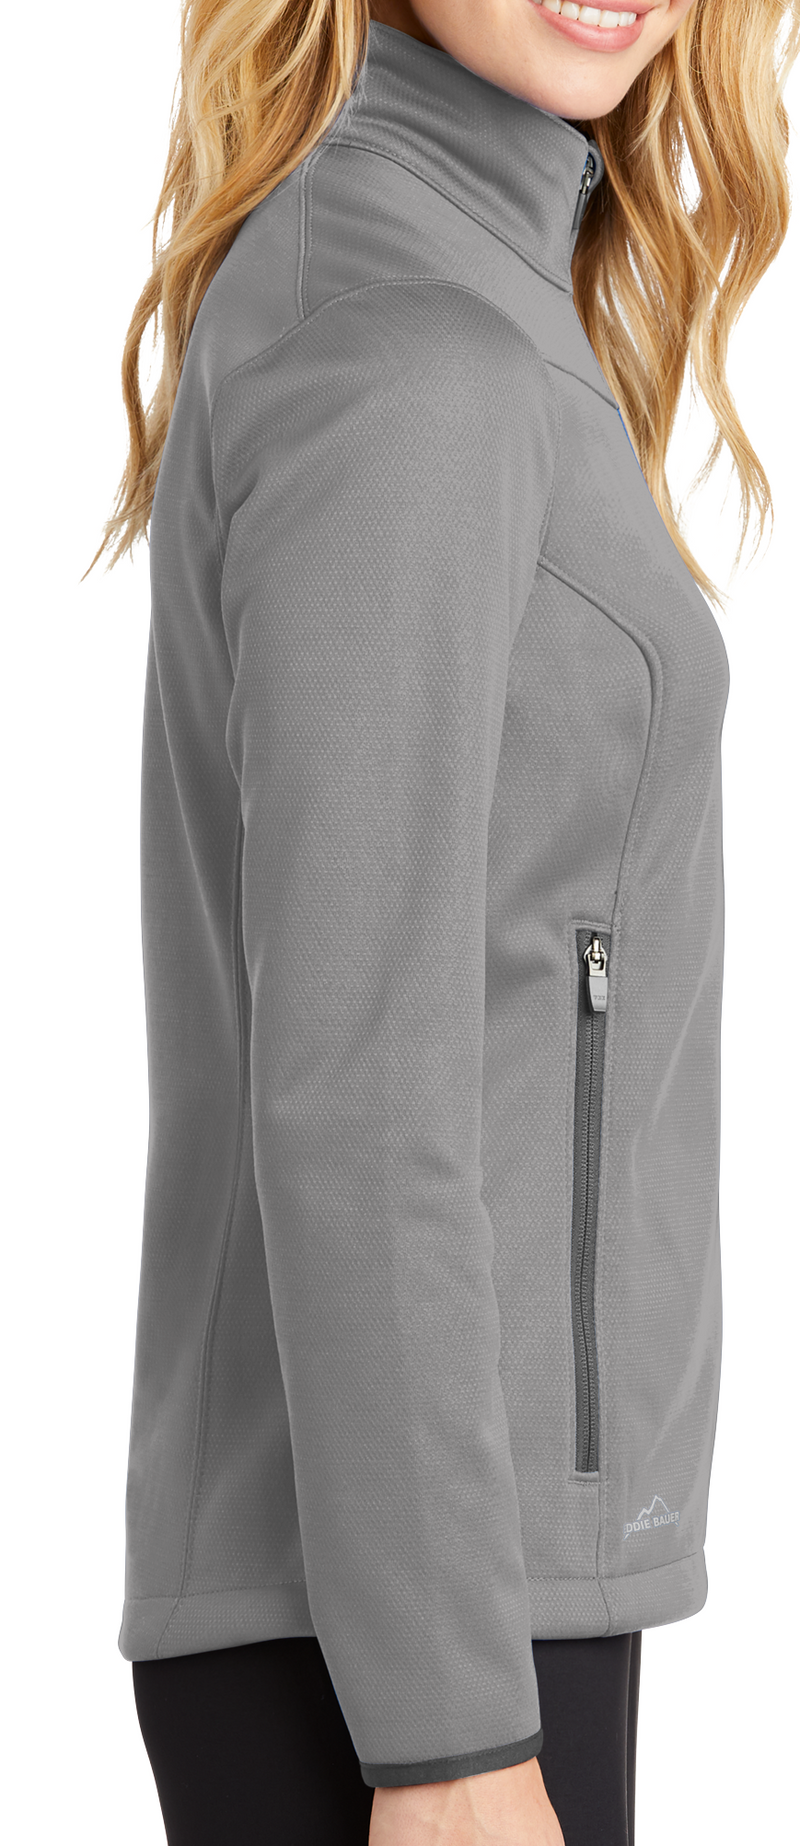 Eddie Bauer [EB539] Ladies Weather-Resist Soft Shell Jacket. Buy More and Save.